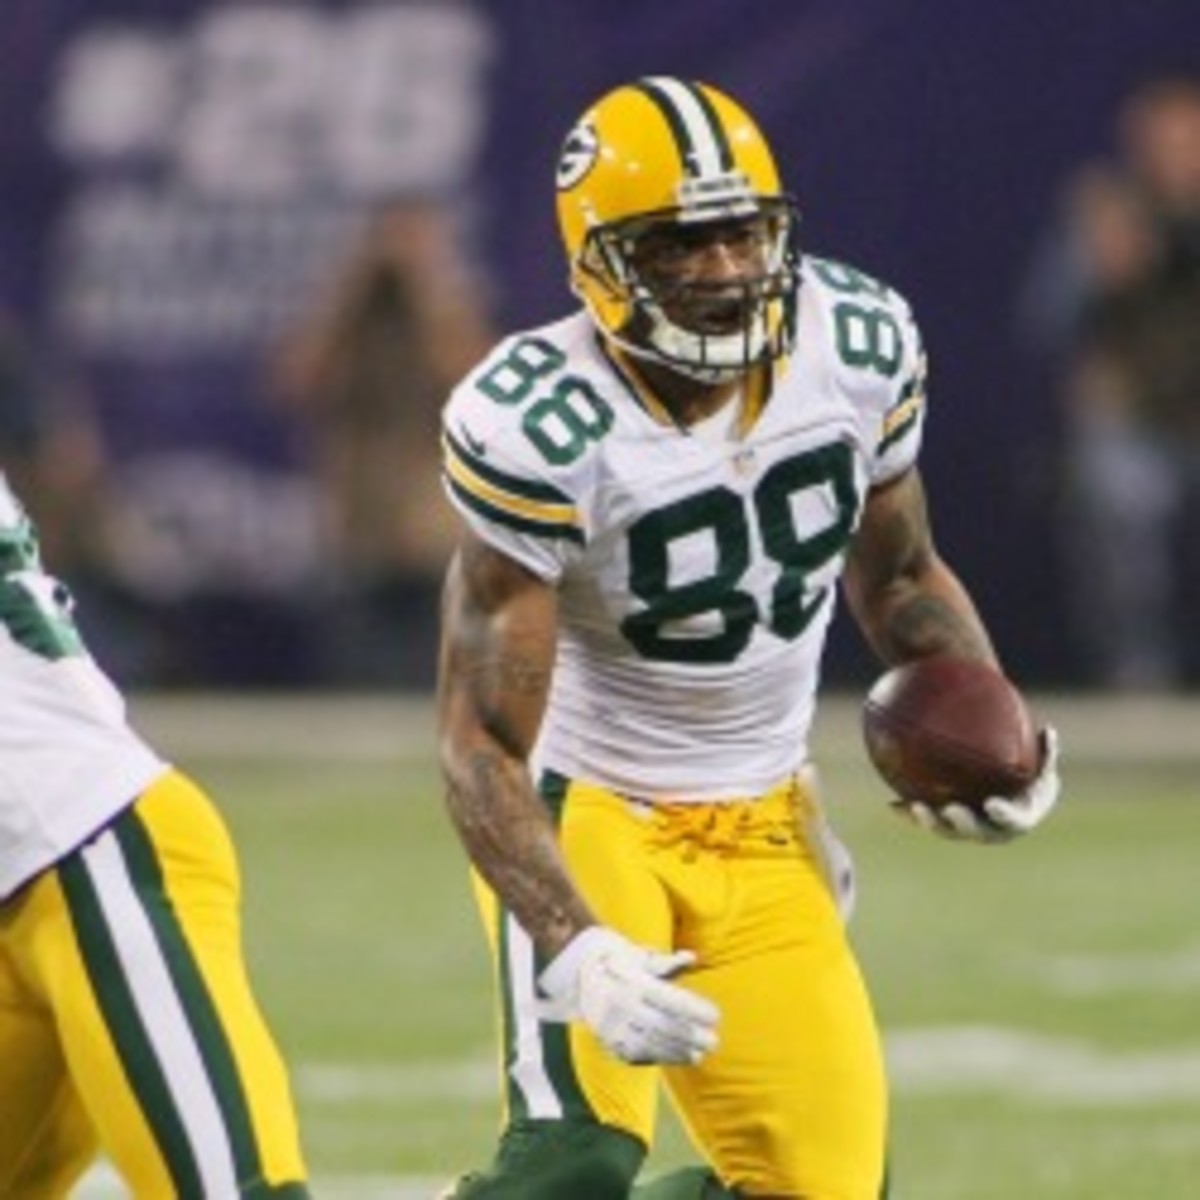 Packers tight end Jermichael Finley could be back with the team next season. (Andy King/Getty Images)